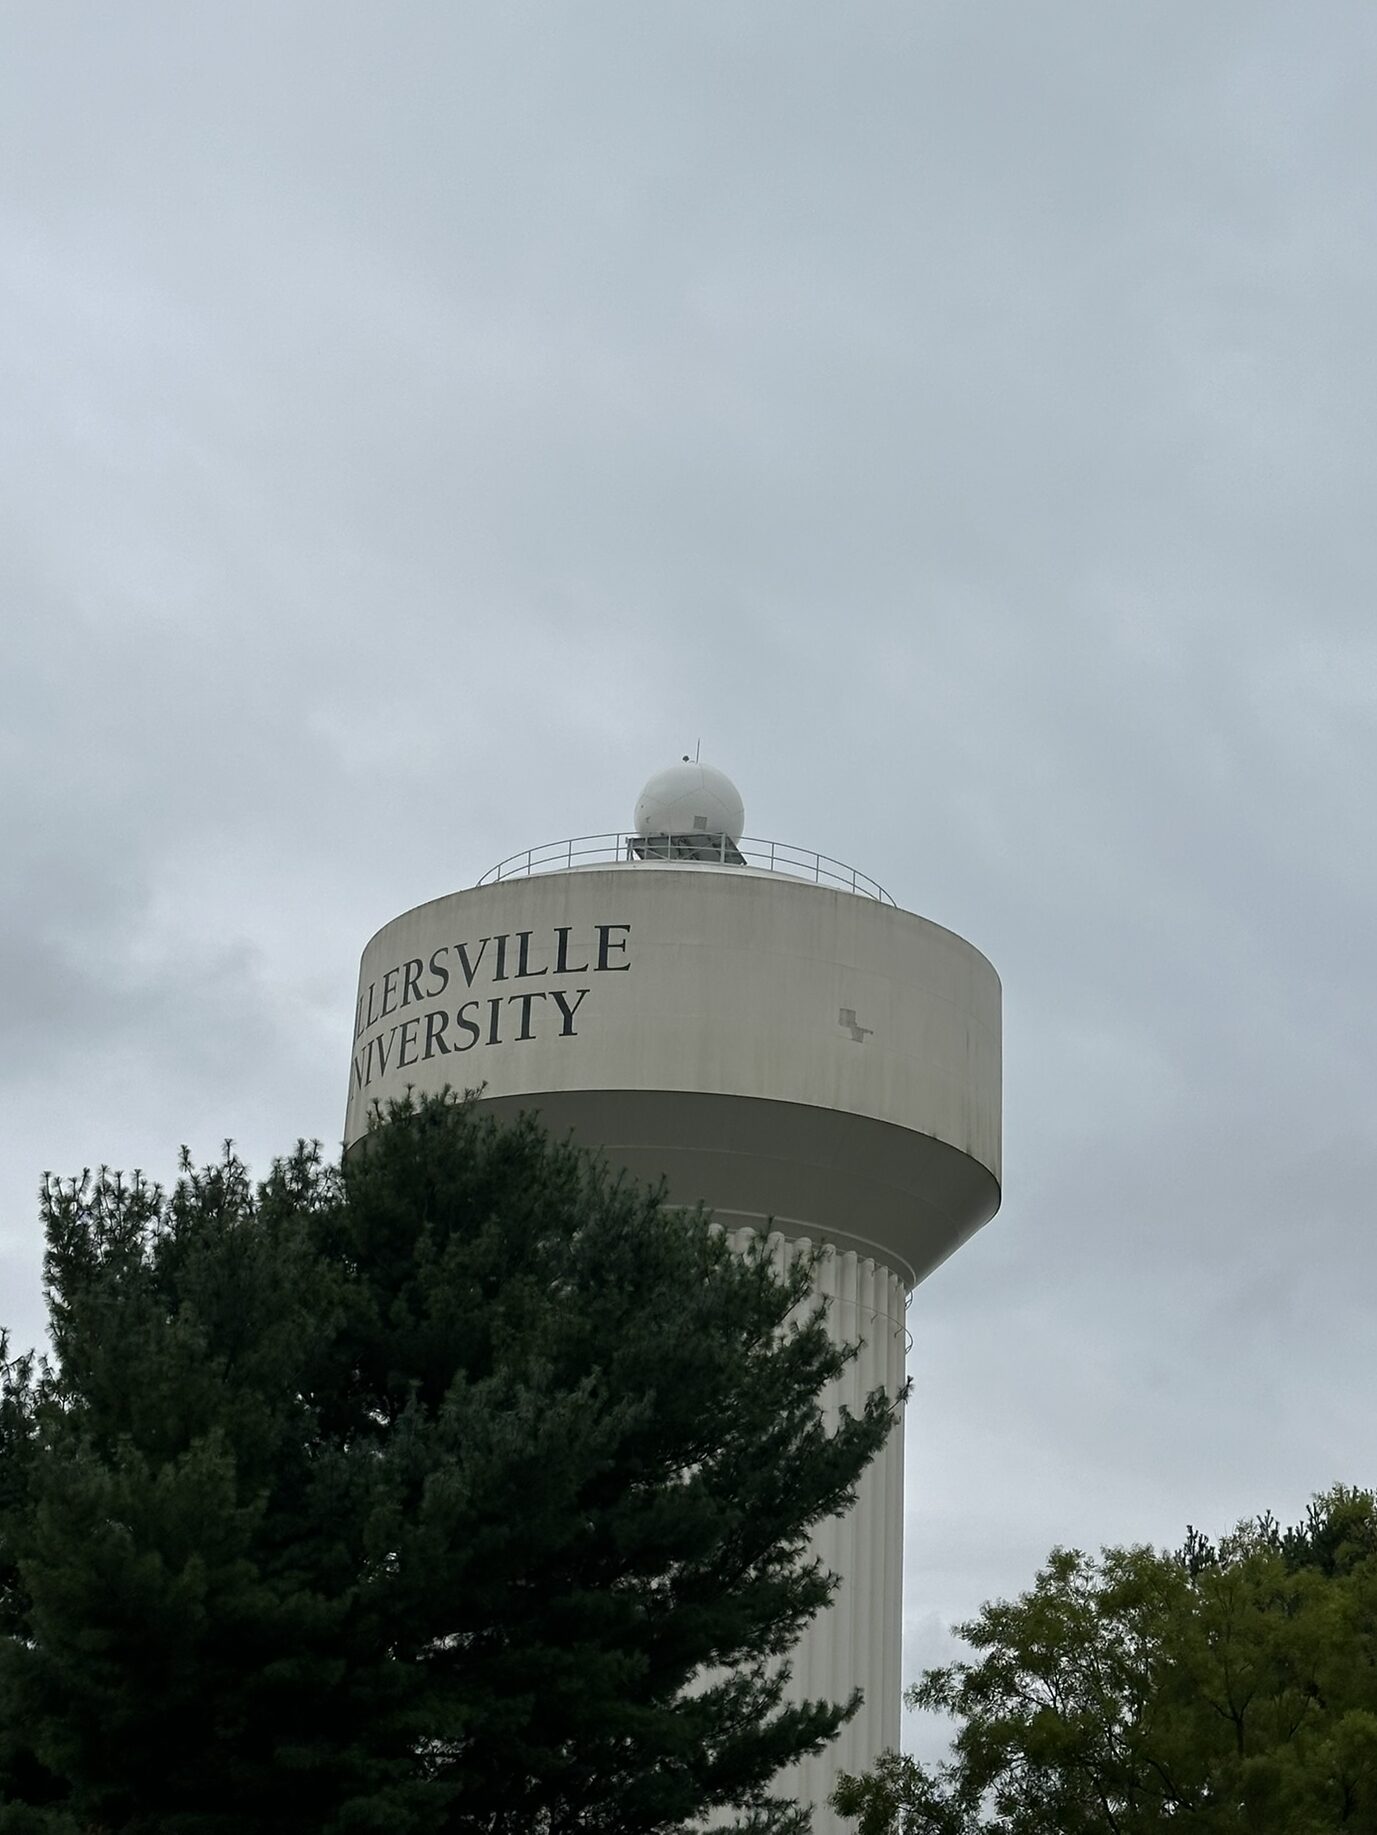 Image showing Climavision radar on top of a tower at Millersville University.